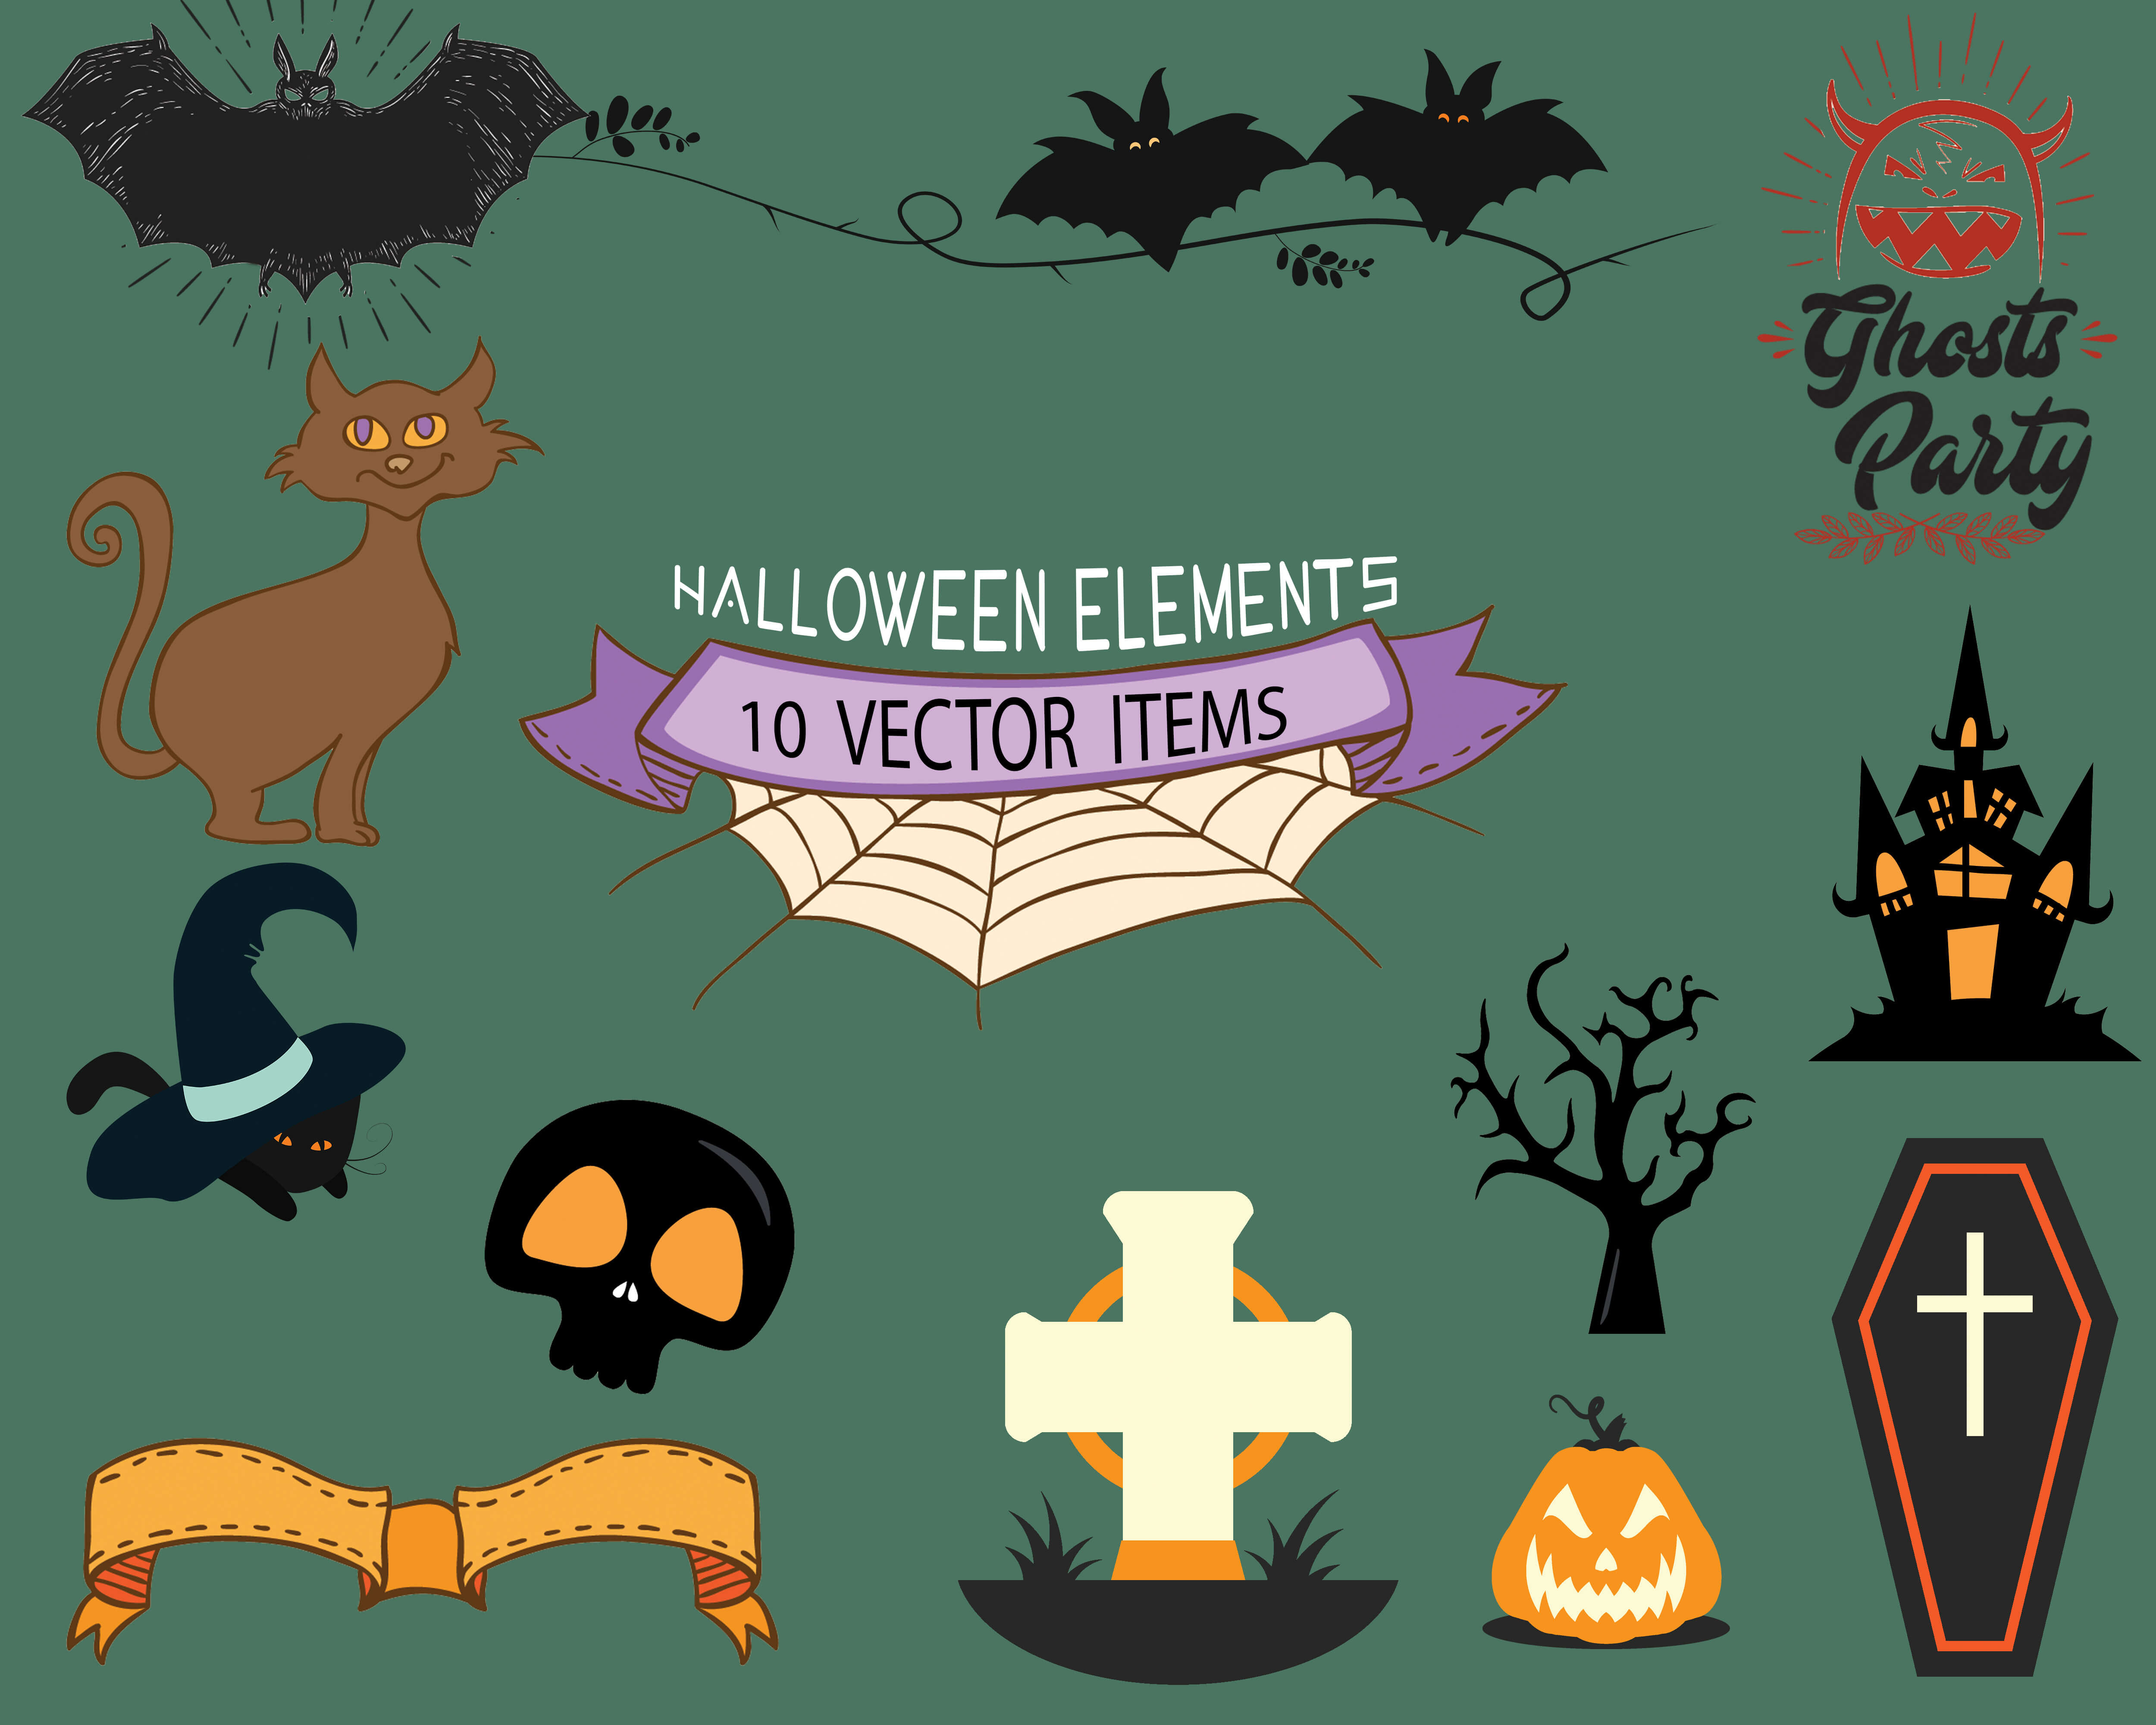 Spooky Vector Images - 10 Ghost Party Elements